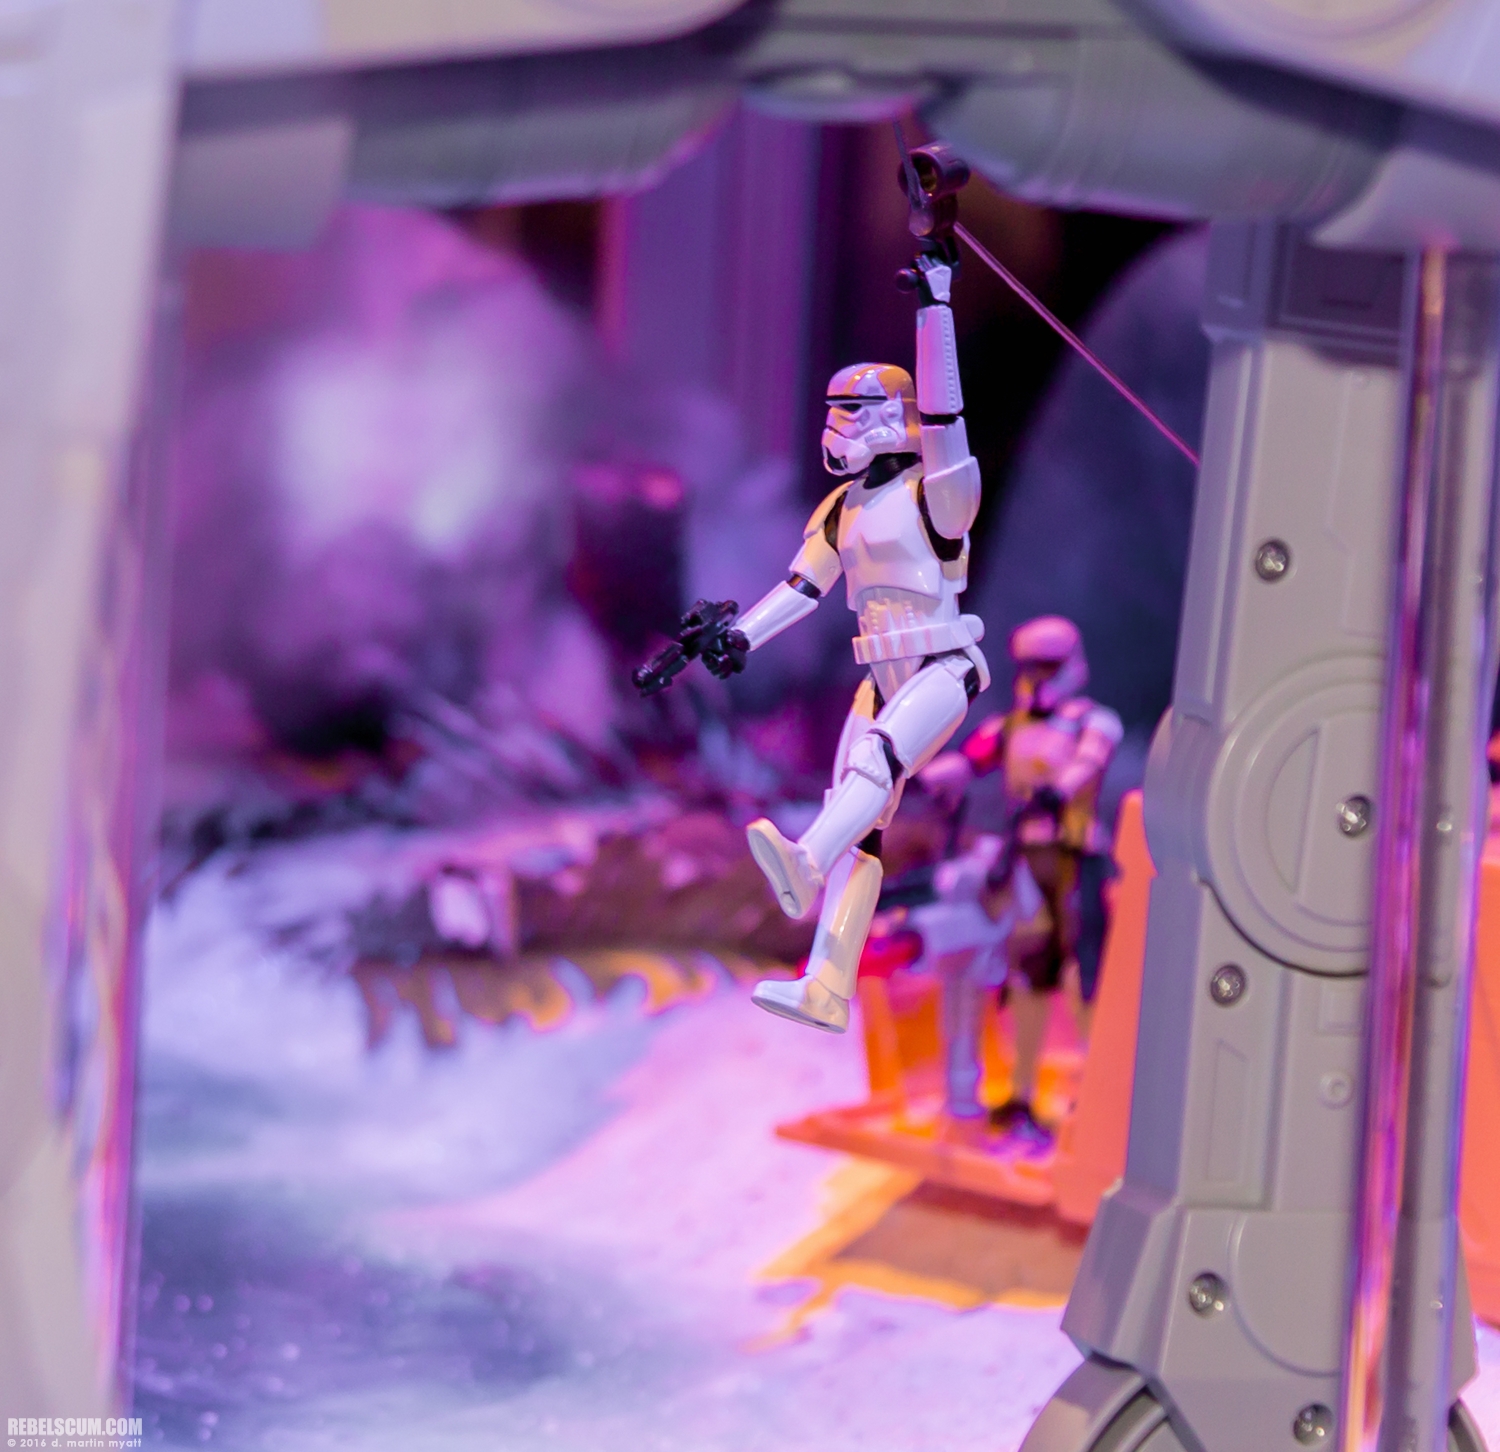 2016-SDCC-Sideshow-Collectibles-Star-Wars-071.jpg